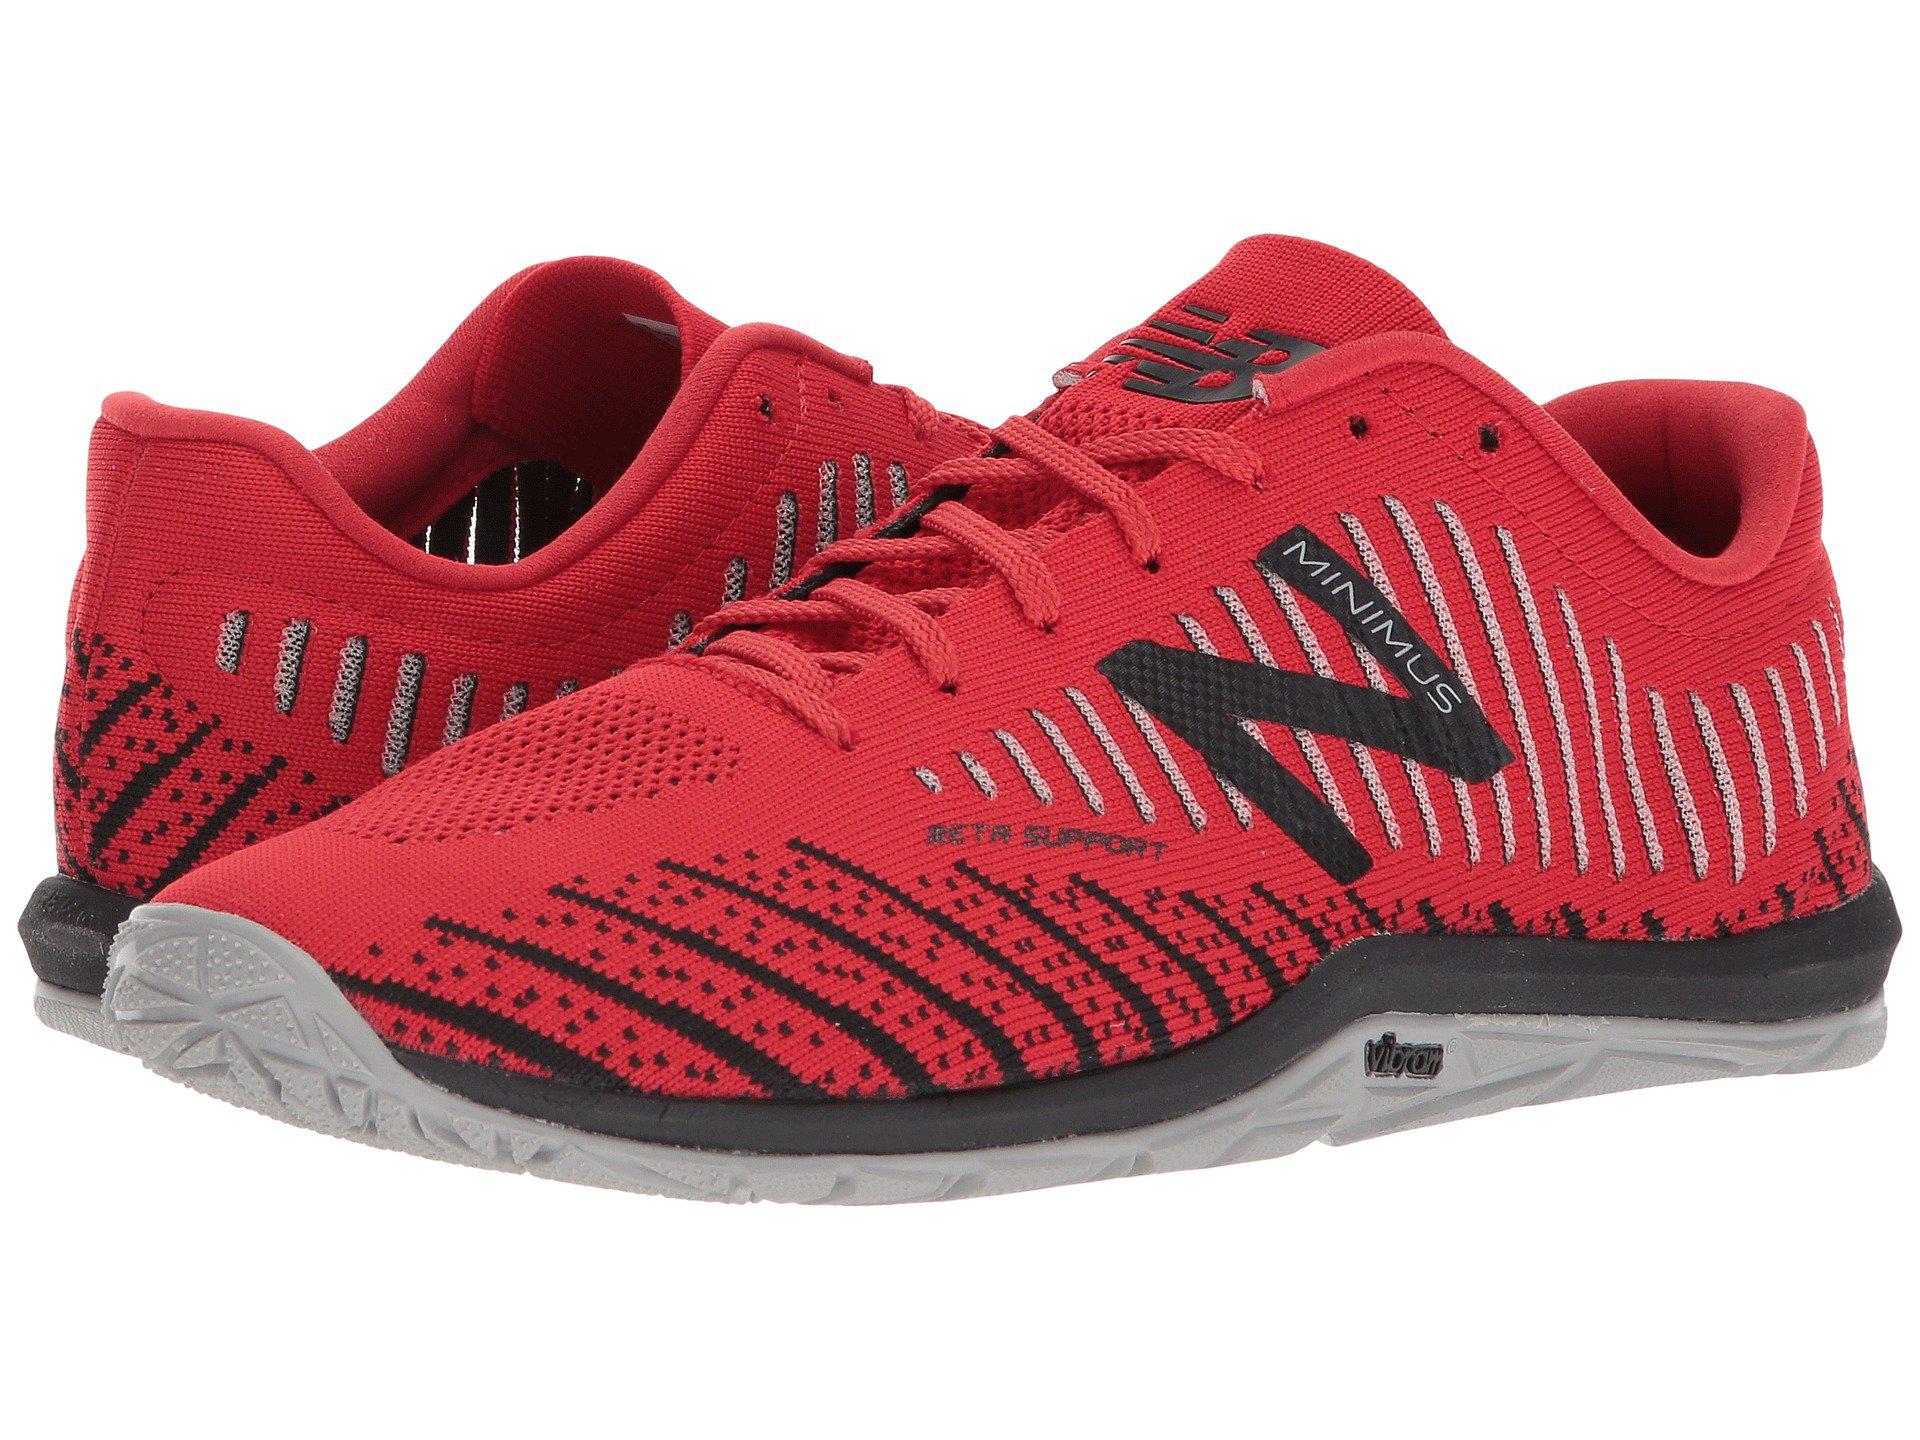 New Balance Synthetic Mx20v7 Fitness Shoes in Red for Men - Lyst